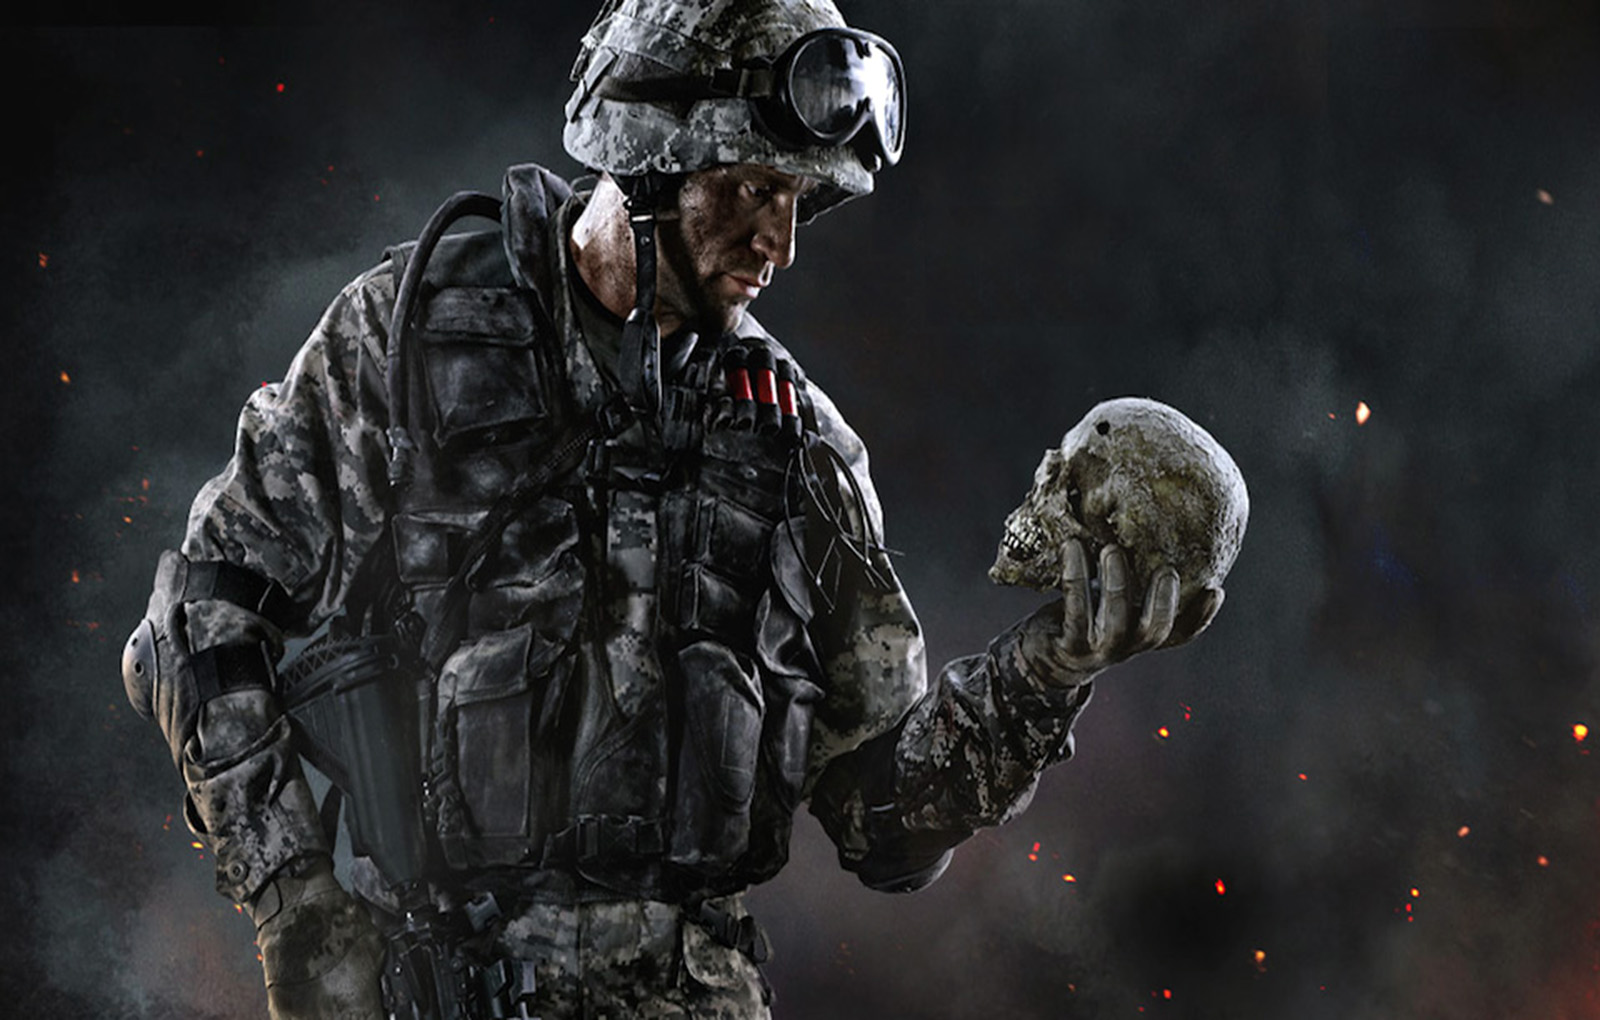 wallpapers gamers,soldier,digital compositing,screenshot,pc game,games